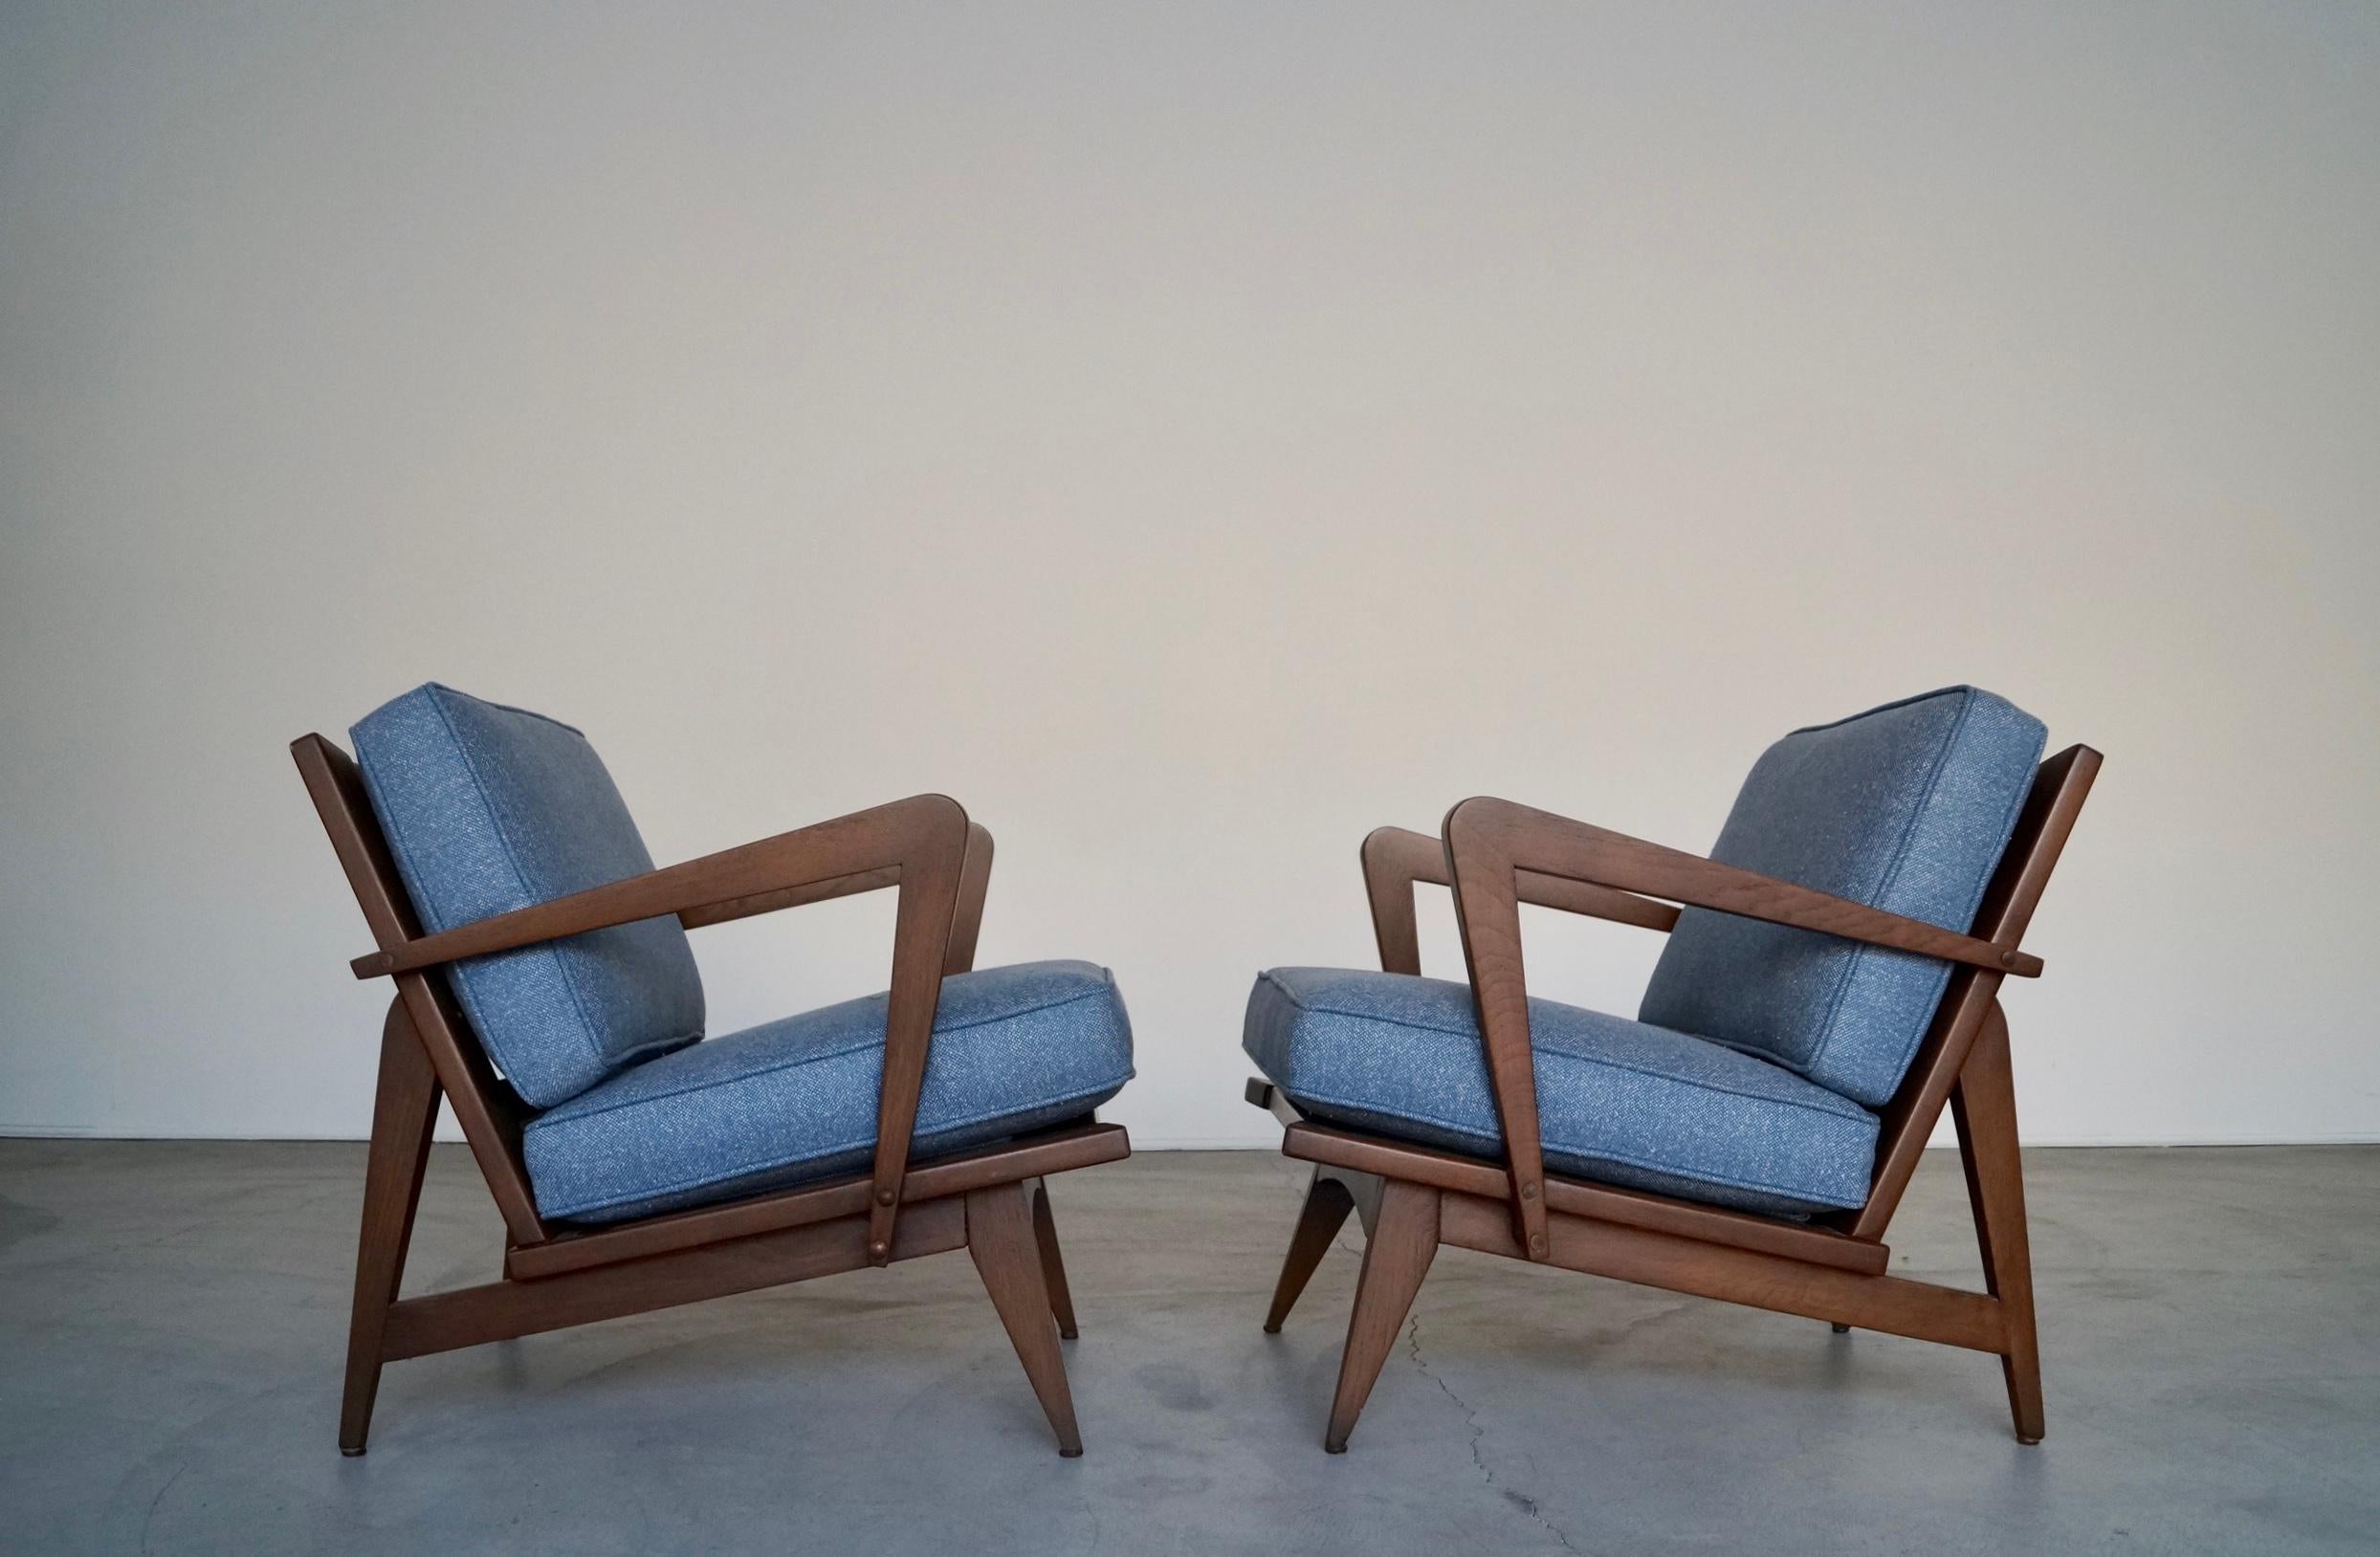 1950's Mid-Century Modern Lounge Chairs - a Pair 6